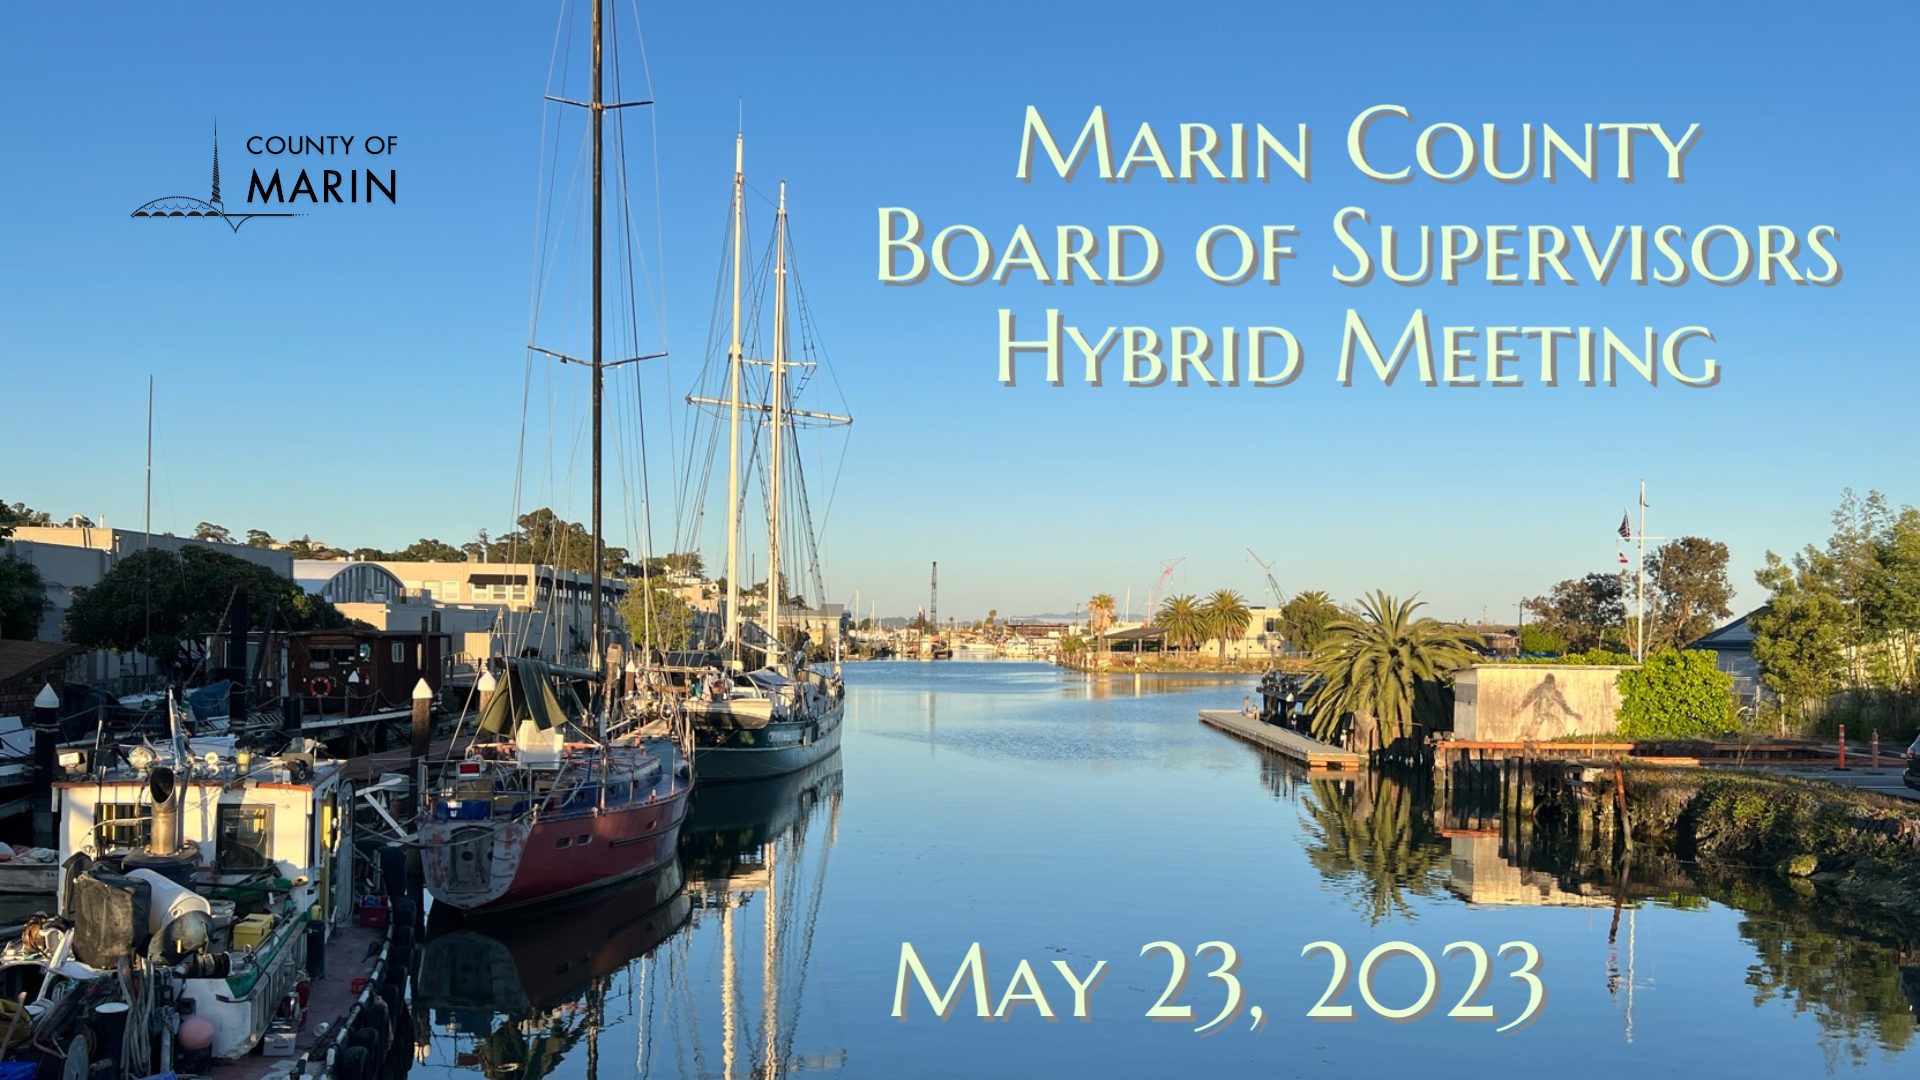 Marin County Board of Supervisors Hybrid Meeting Tuesday, May 23, 2023 9:00 AM